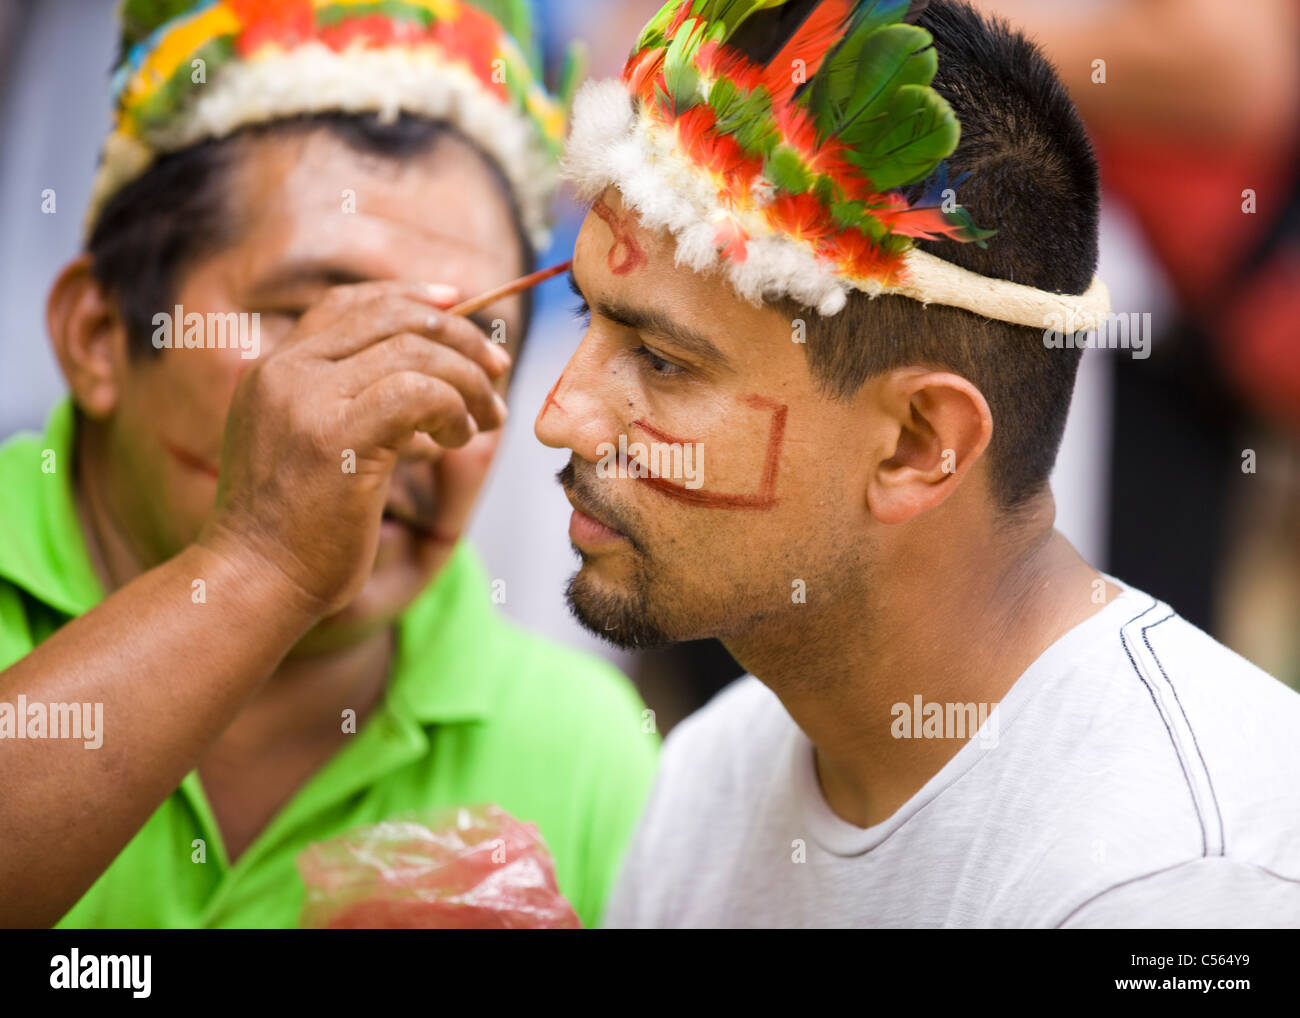 Indigenous Colombian face painting Stock Photo